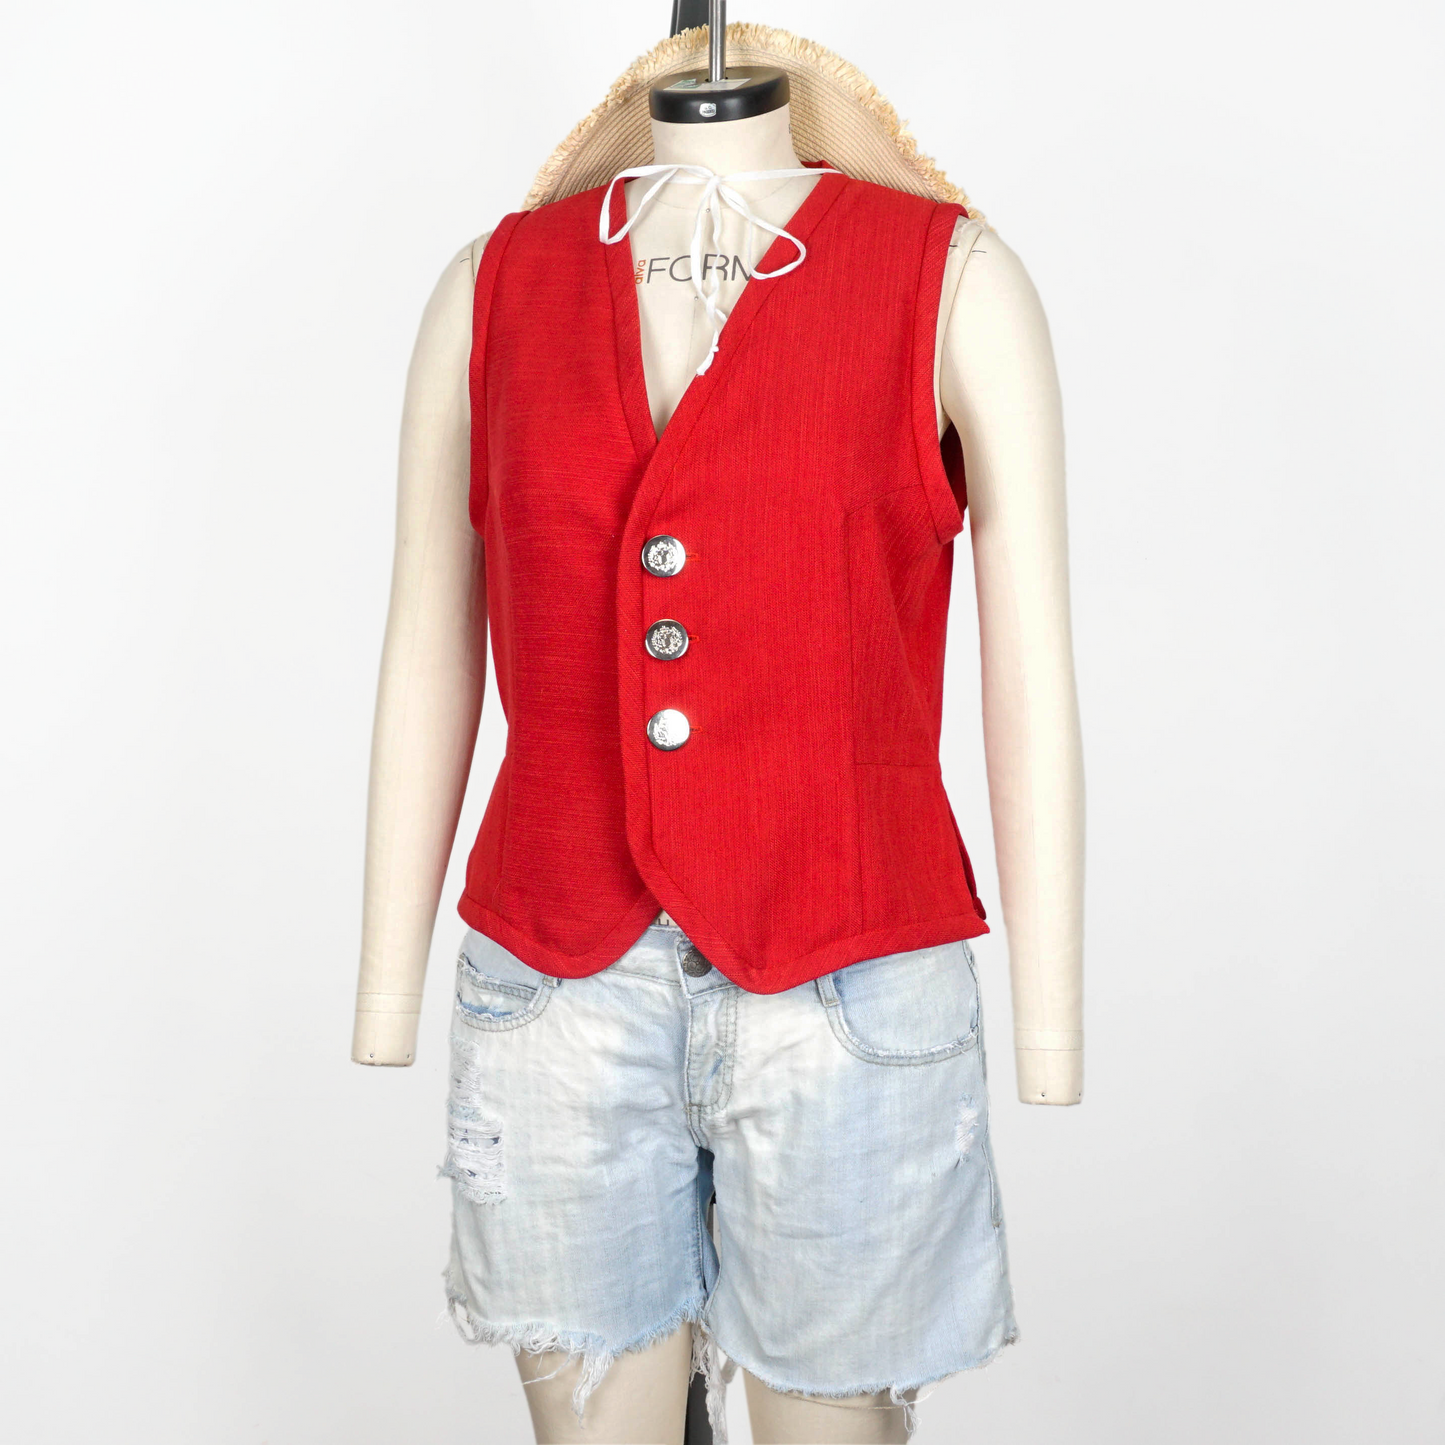 Simple Pirate Vest Sewing Pattern/Downloadable PDF and Tutorial Book